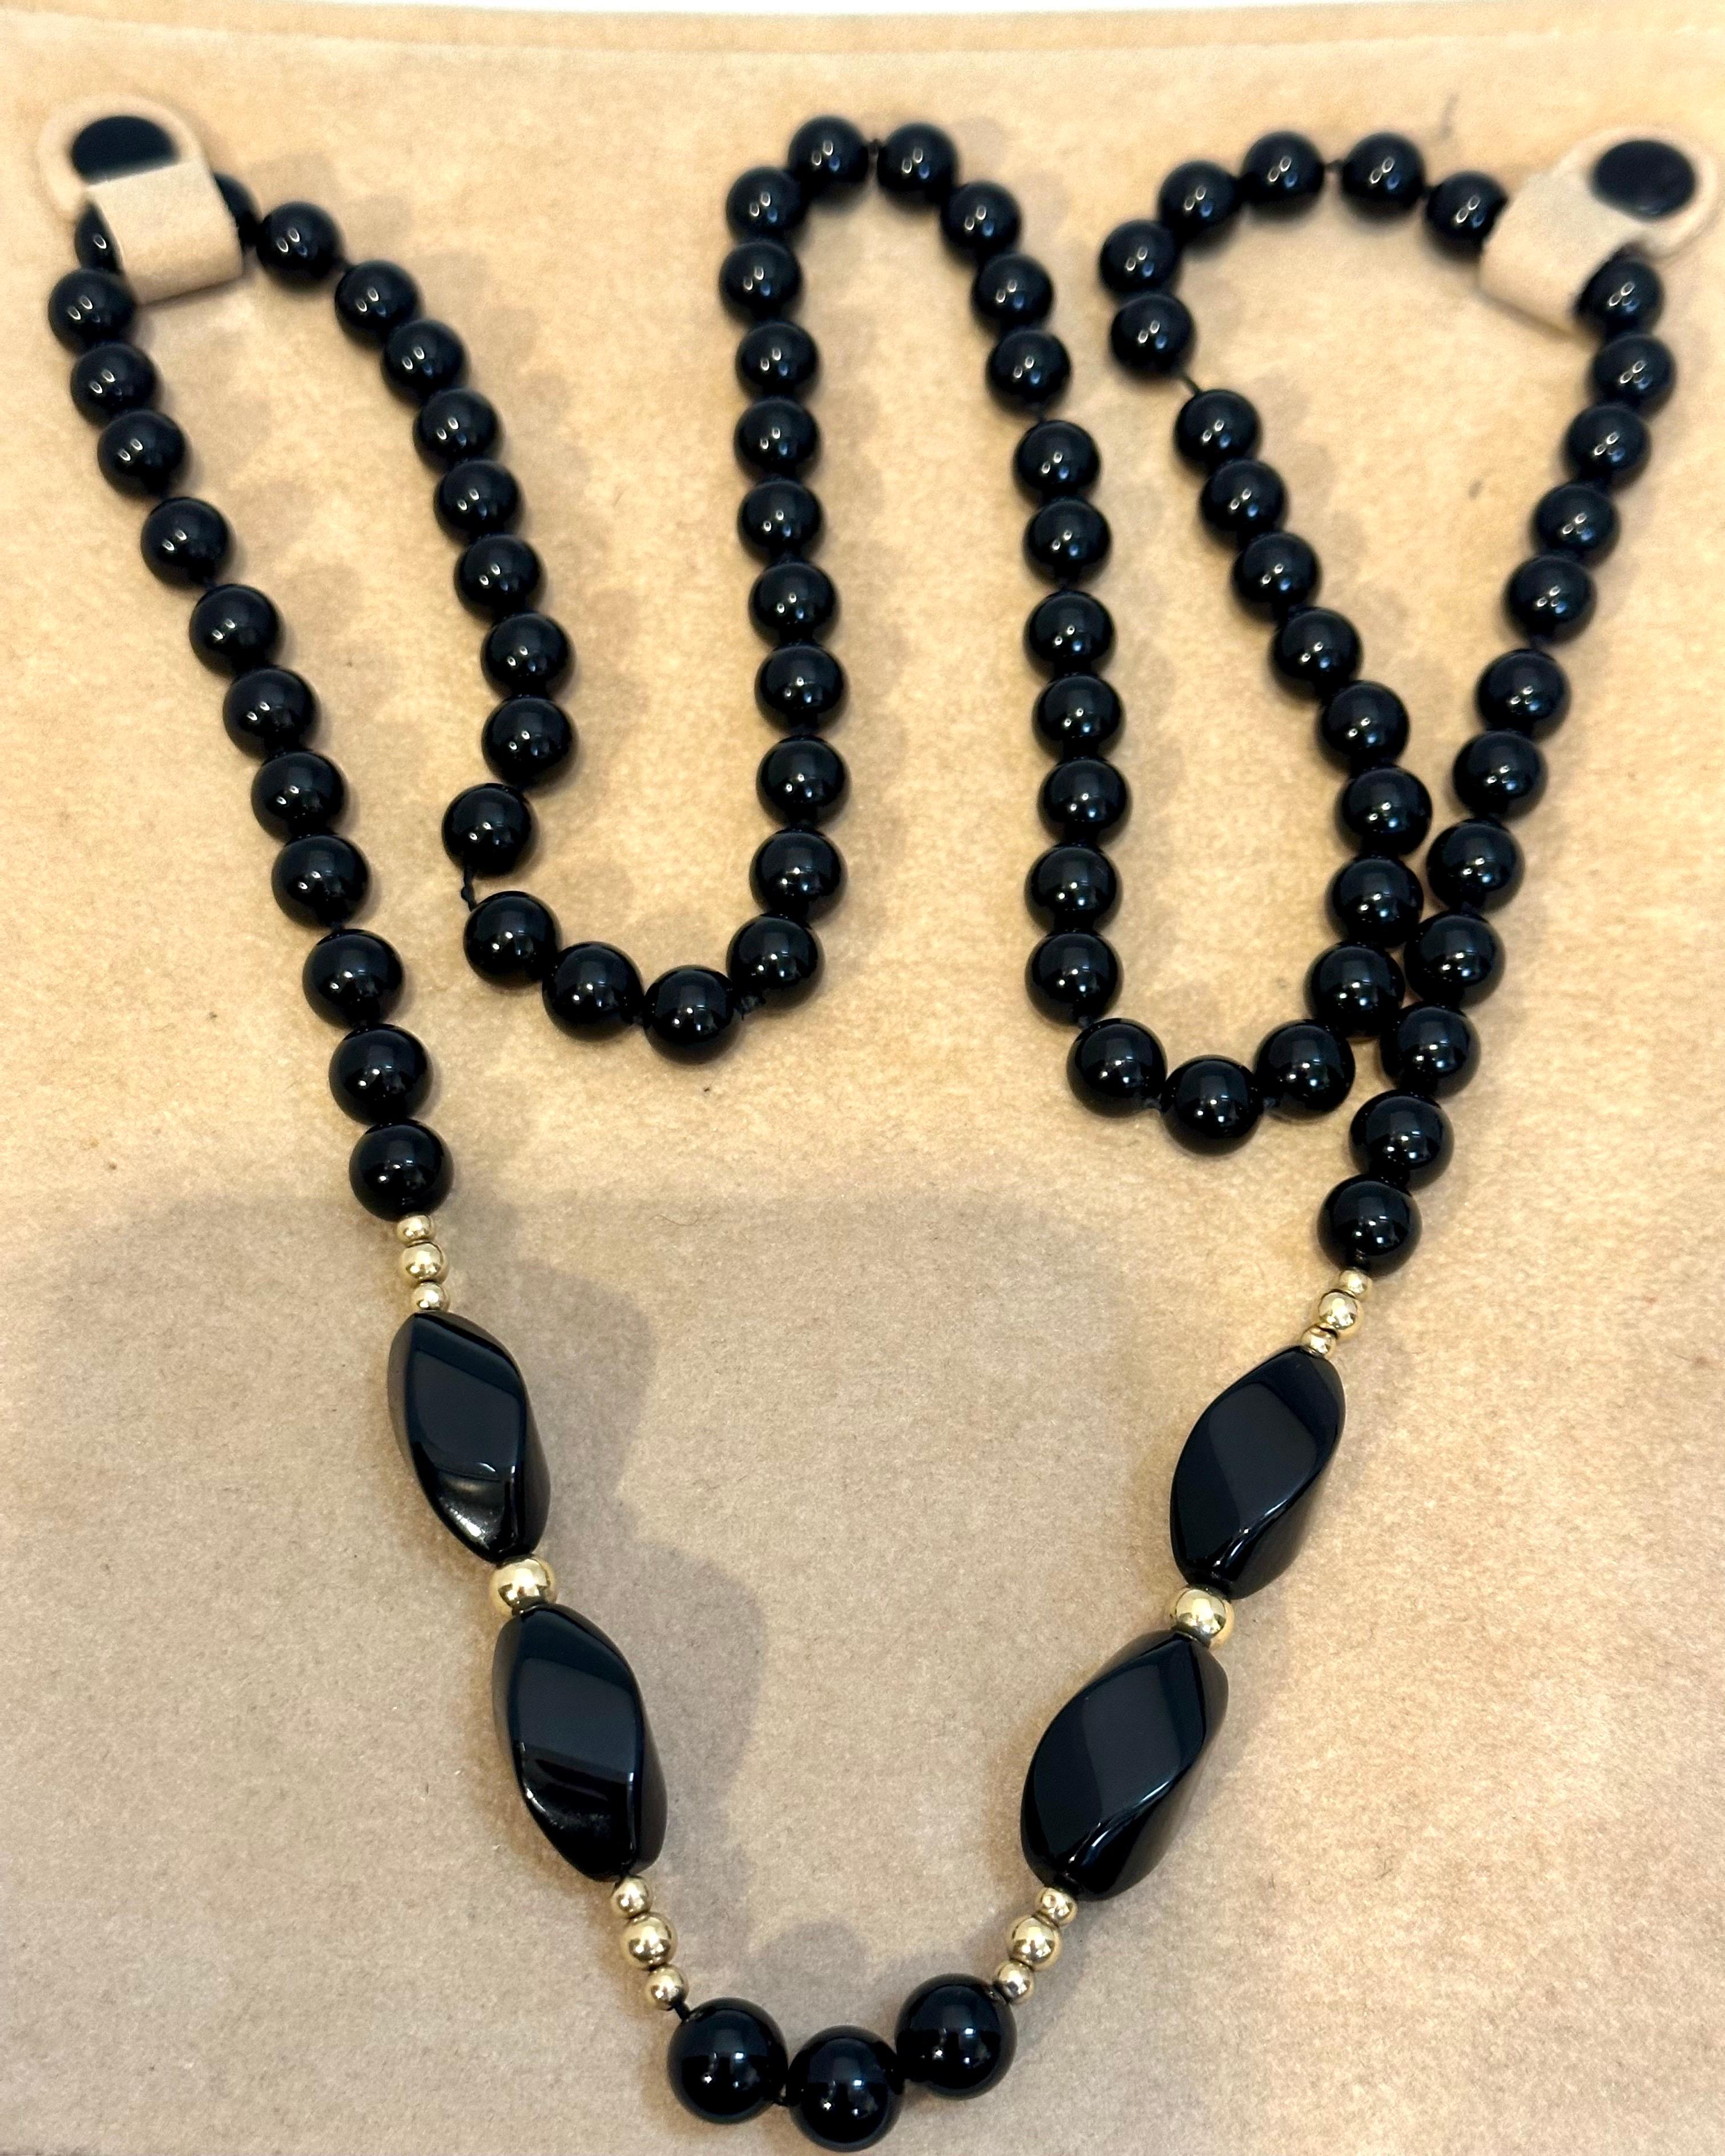 Round 8 MM Bead Black Onyx & 14 Karat Gold Bead Necklace 32 Inch Long
Beautiful , Very Dressy but also good for casual dressing 
Black 8 MM bead necklace which has  14 Karat yellow gold beads too
The necklace also features 4 very large long beads to